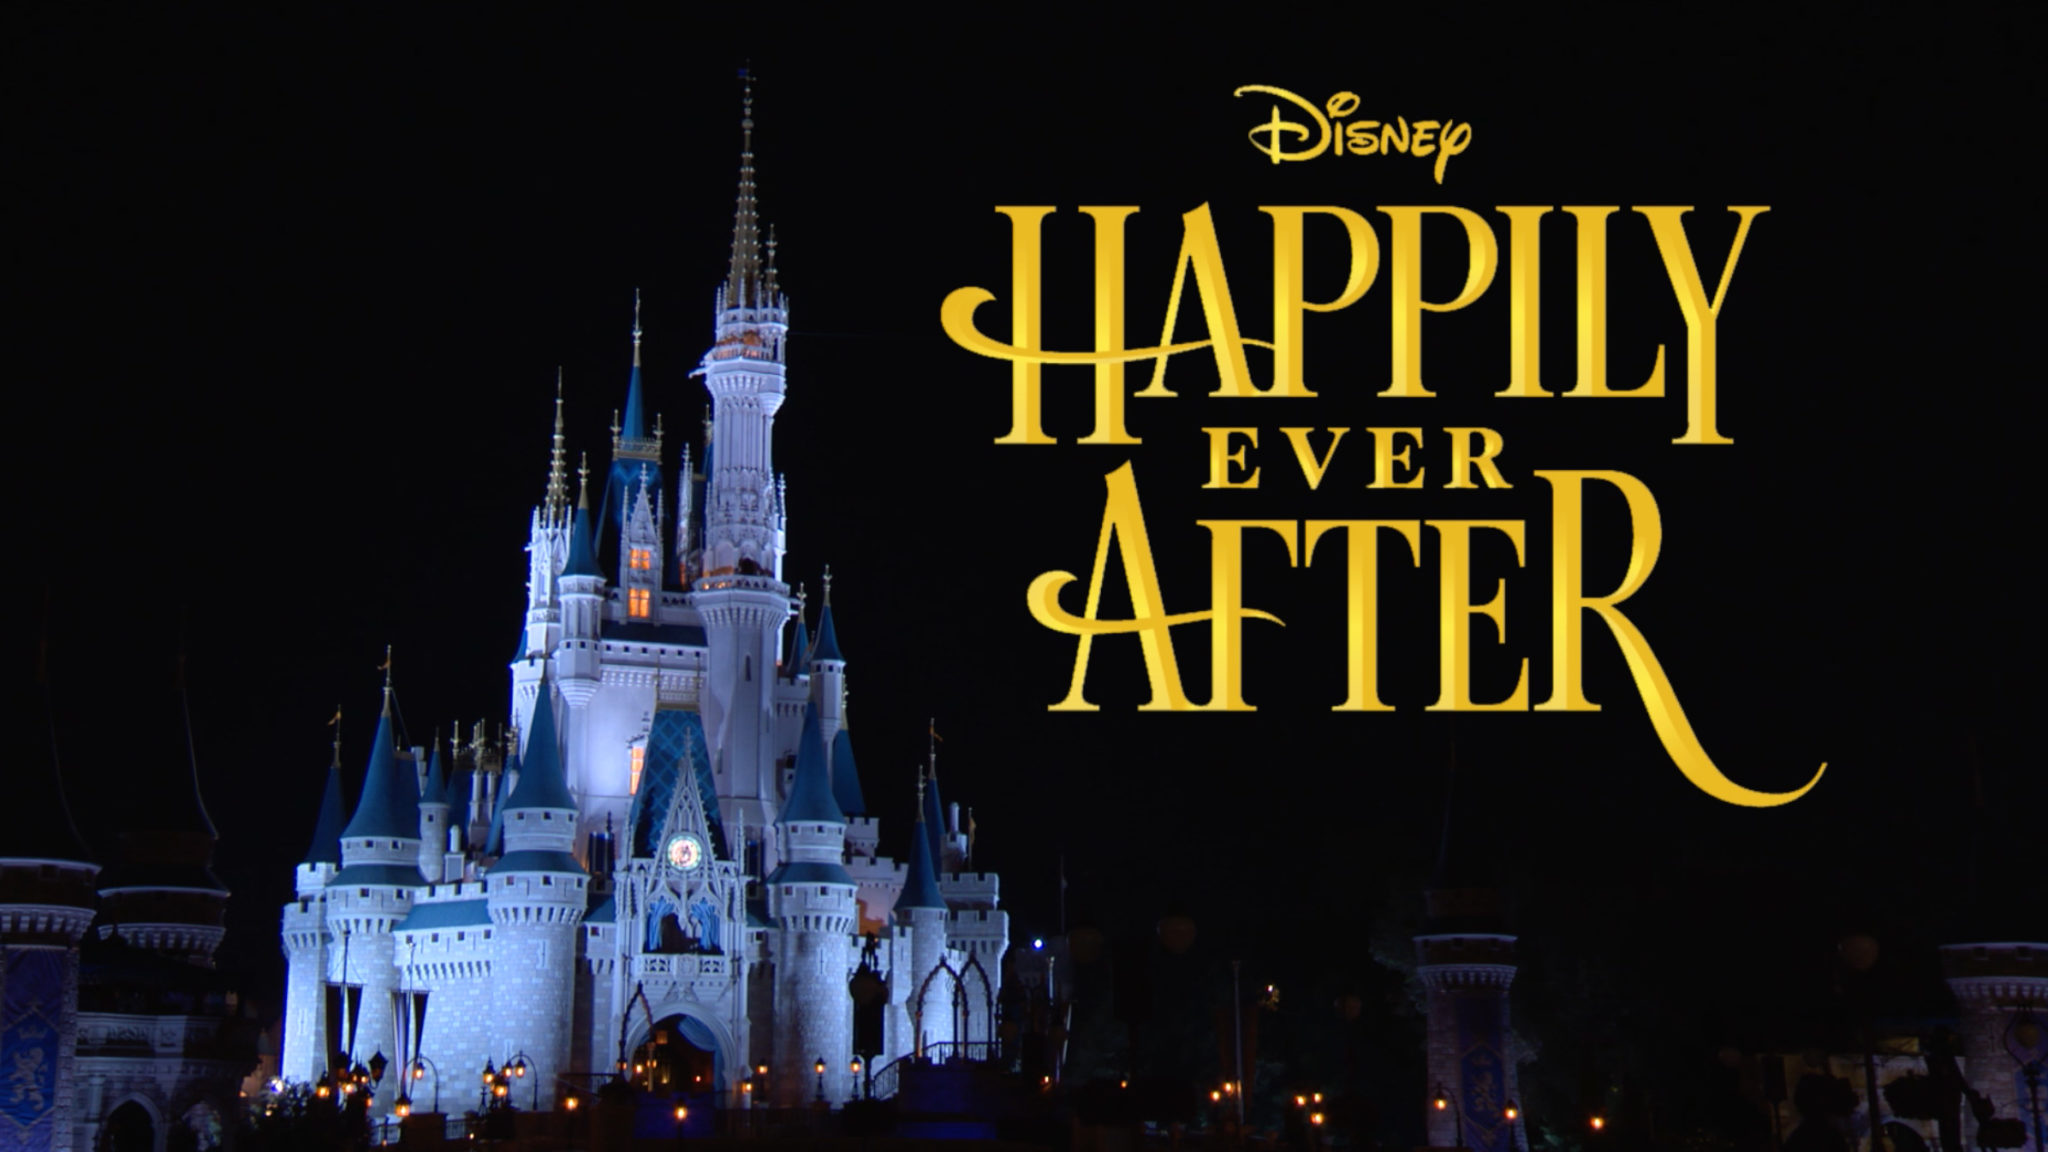 A First Listen of the Amazing Score Featured In Magic Kingdom’s “Happily Ever After” Fireworks Spectacular